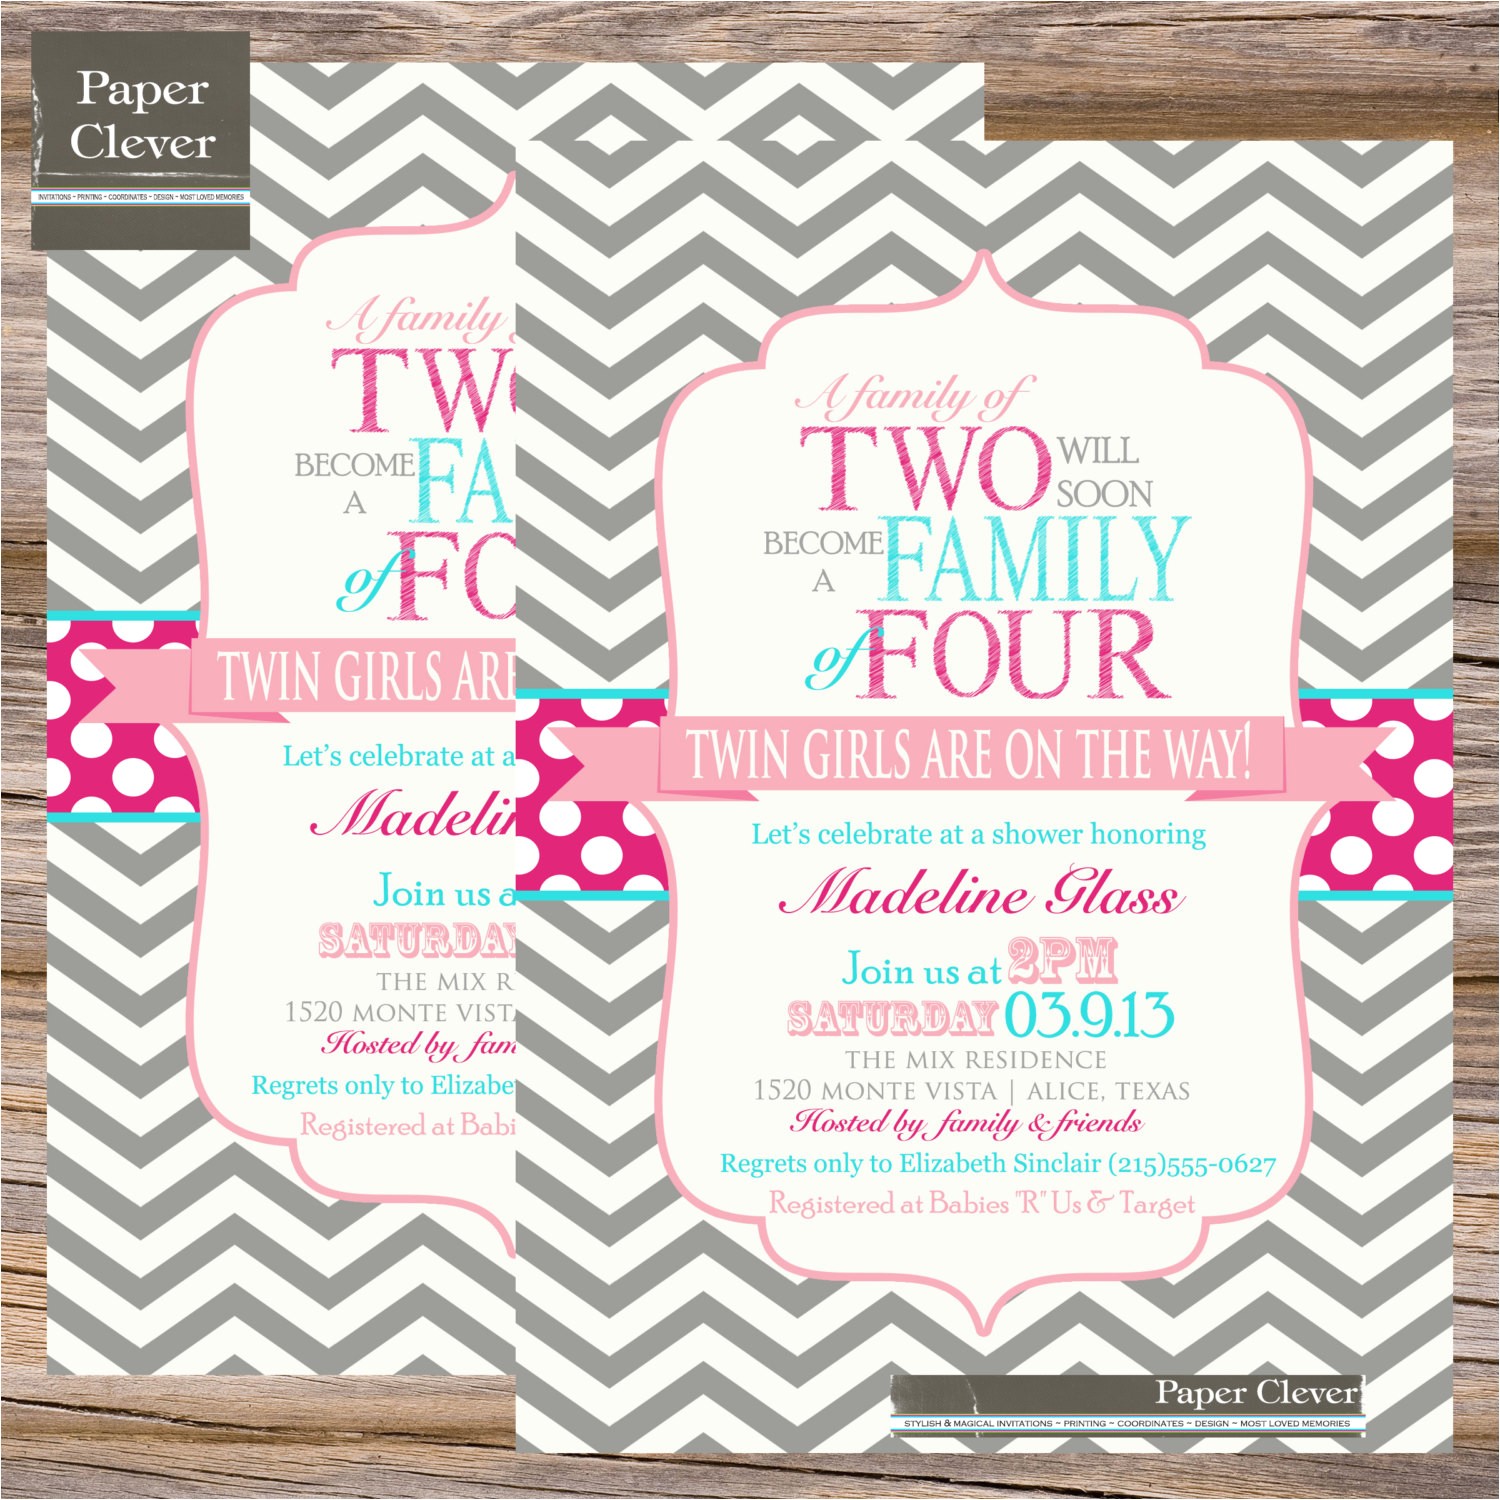 Dr Seuss Baby Shower Invitations Target Elegant Dr Seuss Baby Shower Invitations Printable Free